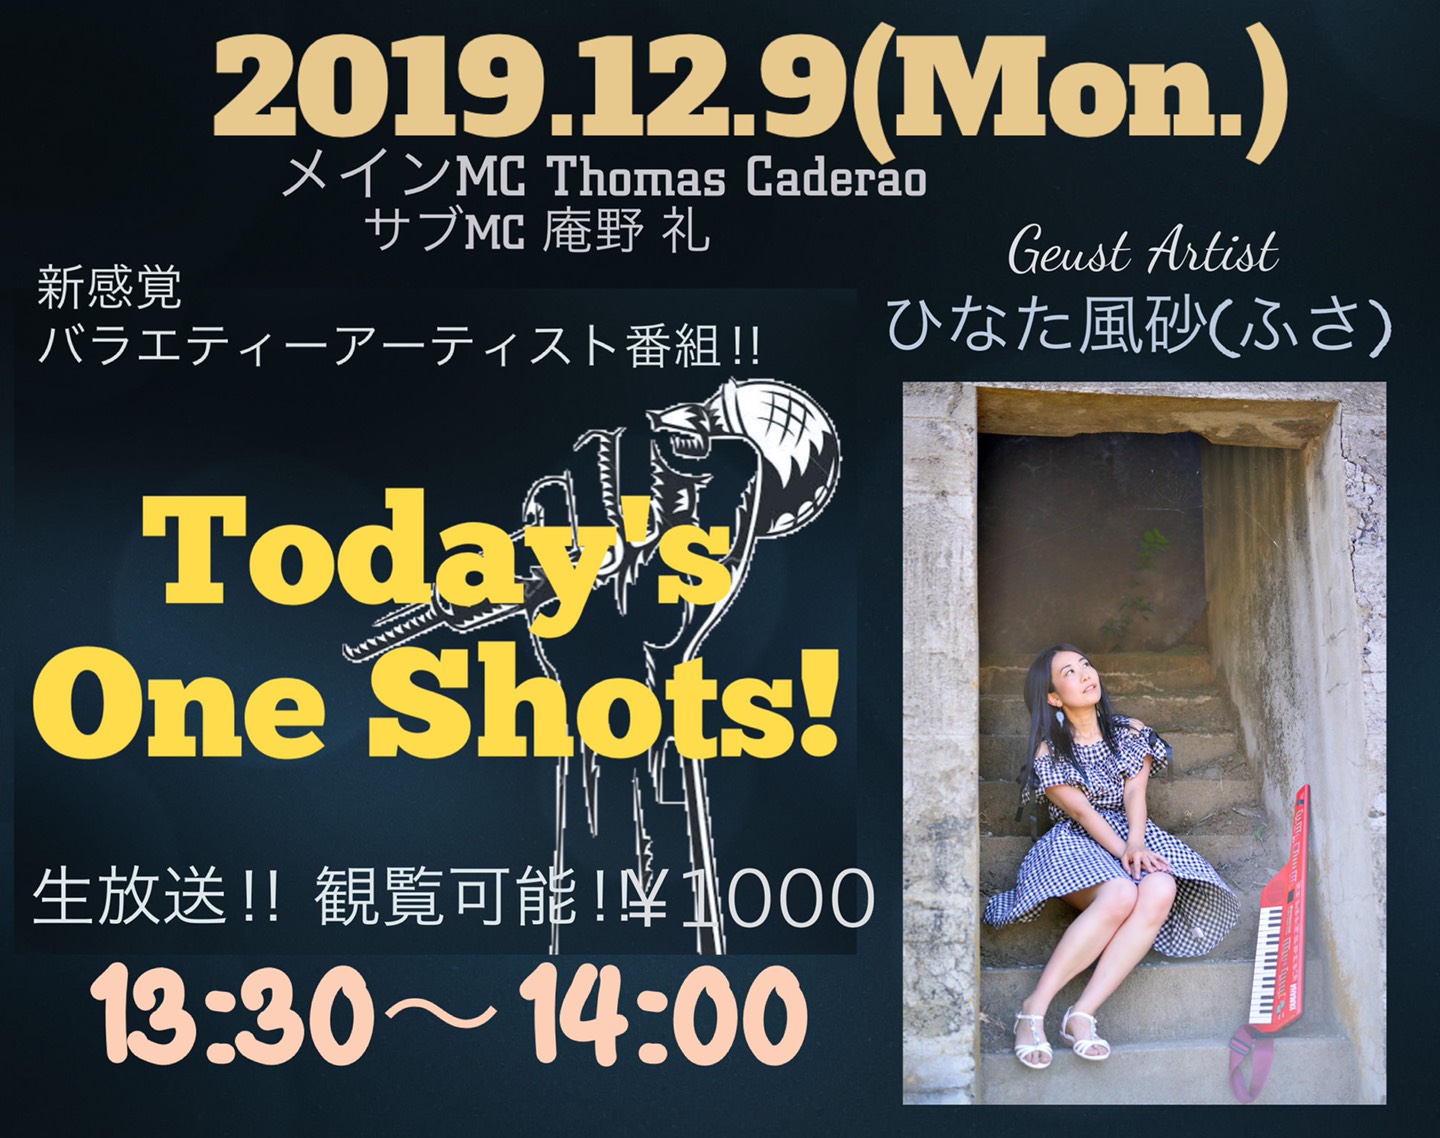 Todays One Shot’s　12月9日　13:30-14:00にて放送開始！！